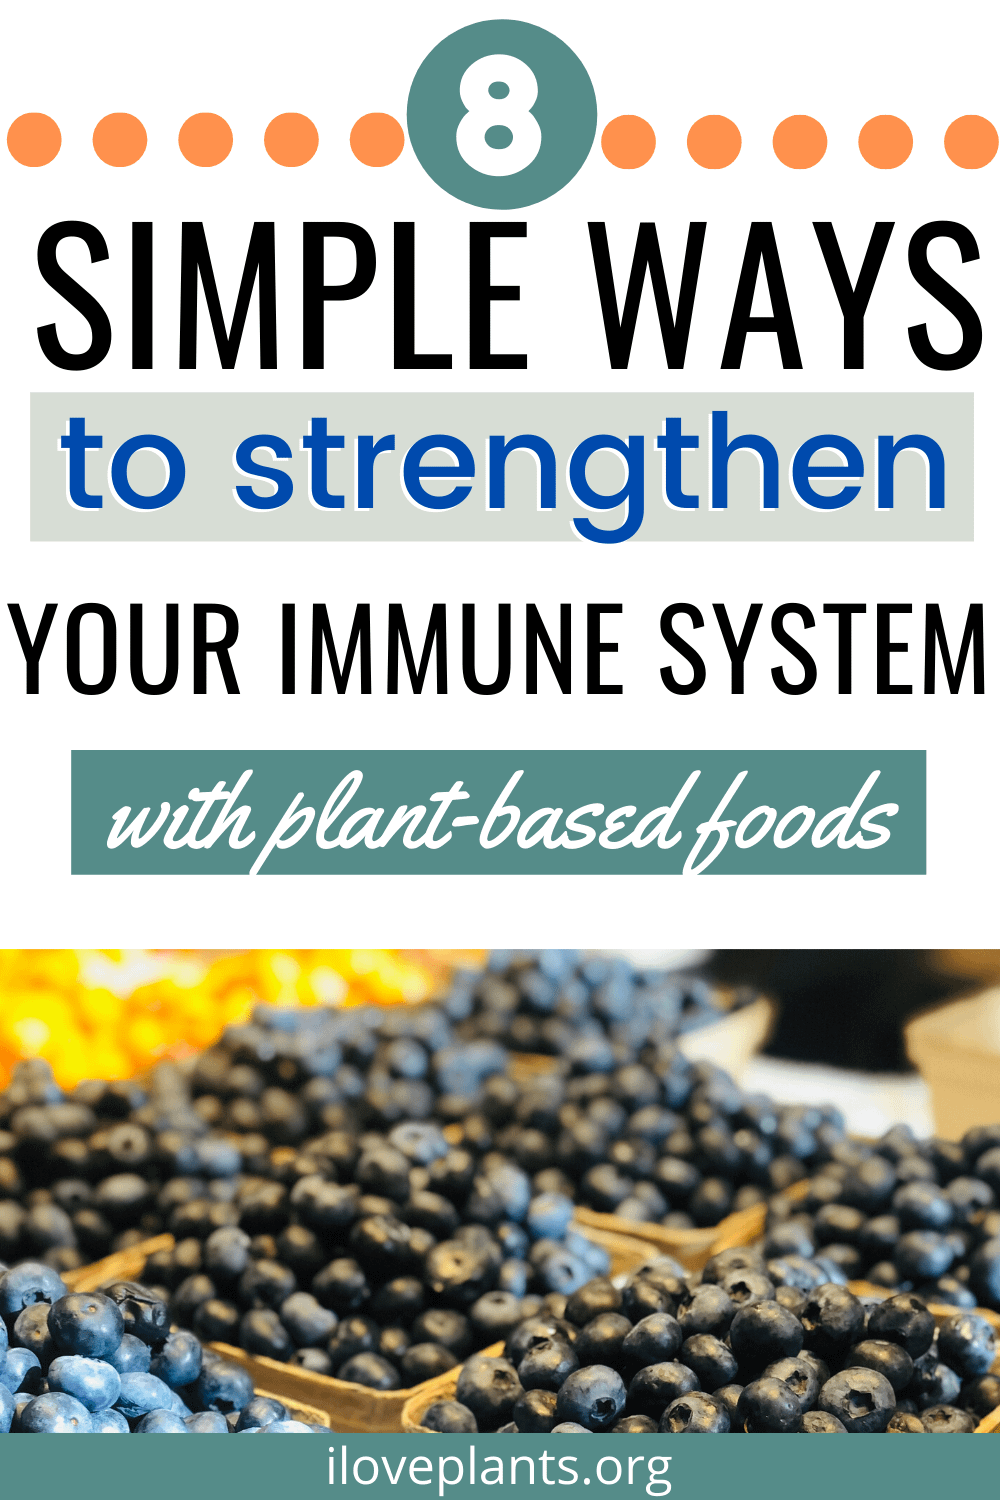 Vegan nutrition can give you a total immunesystem boost! There are many plant based benefits, click to find out how to get the upper hand and give your body an advantage. #plantbased #plantbaseddiet #plantbasedgoodness